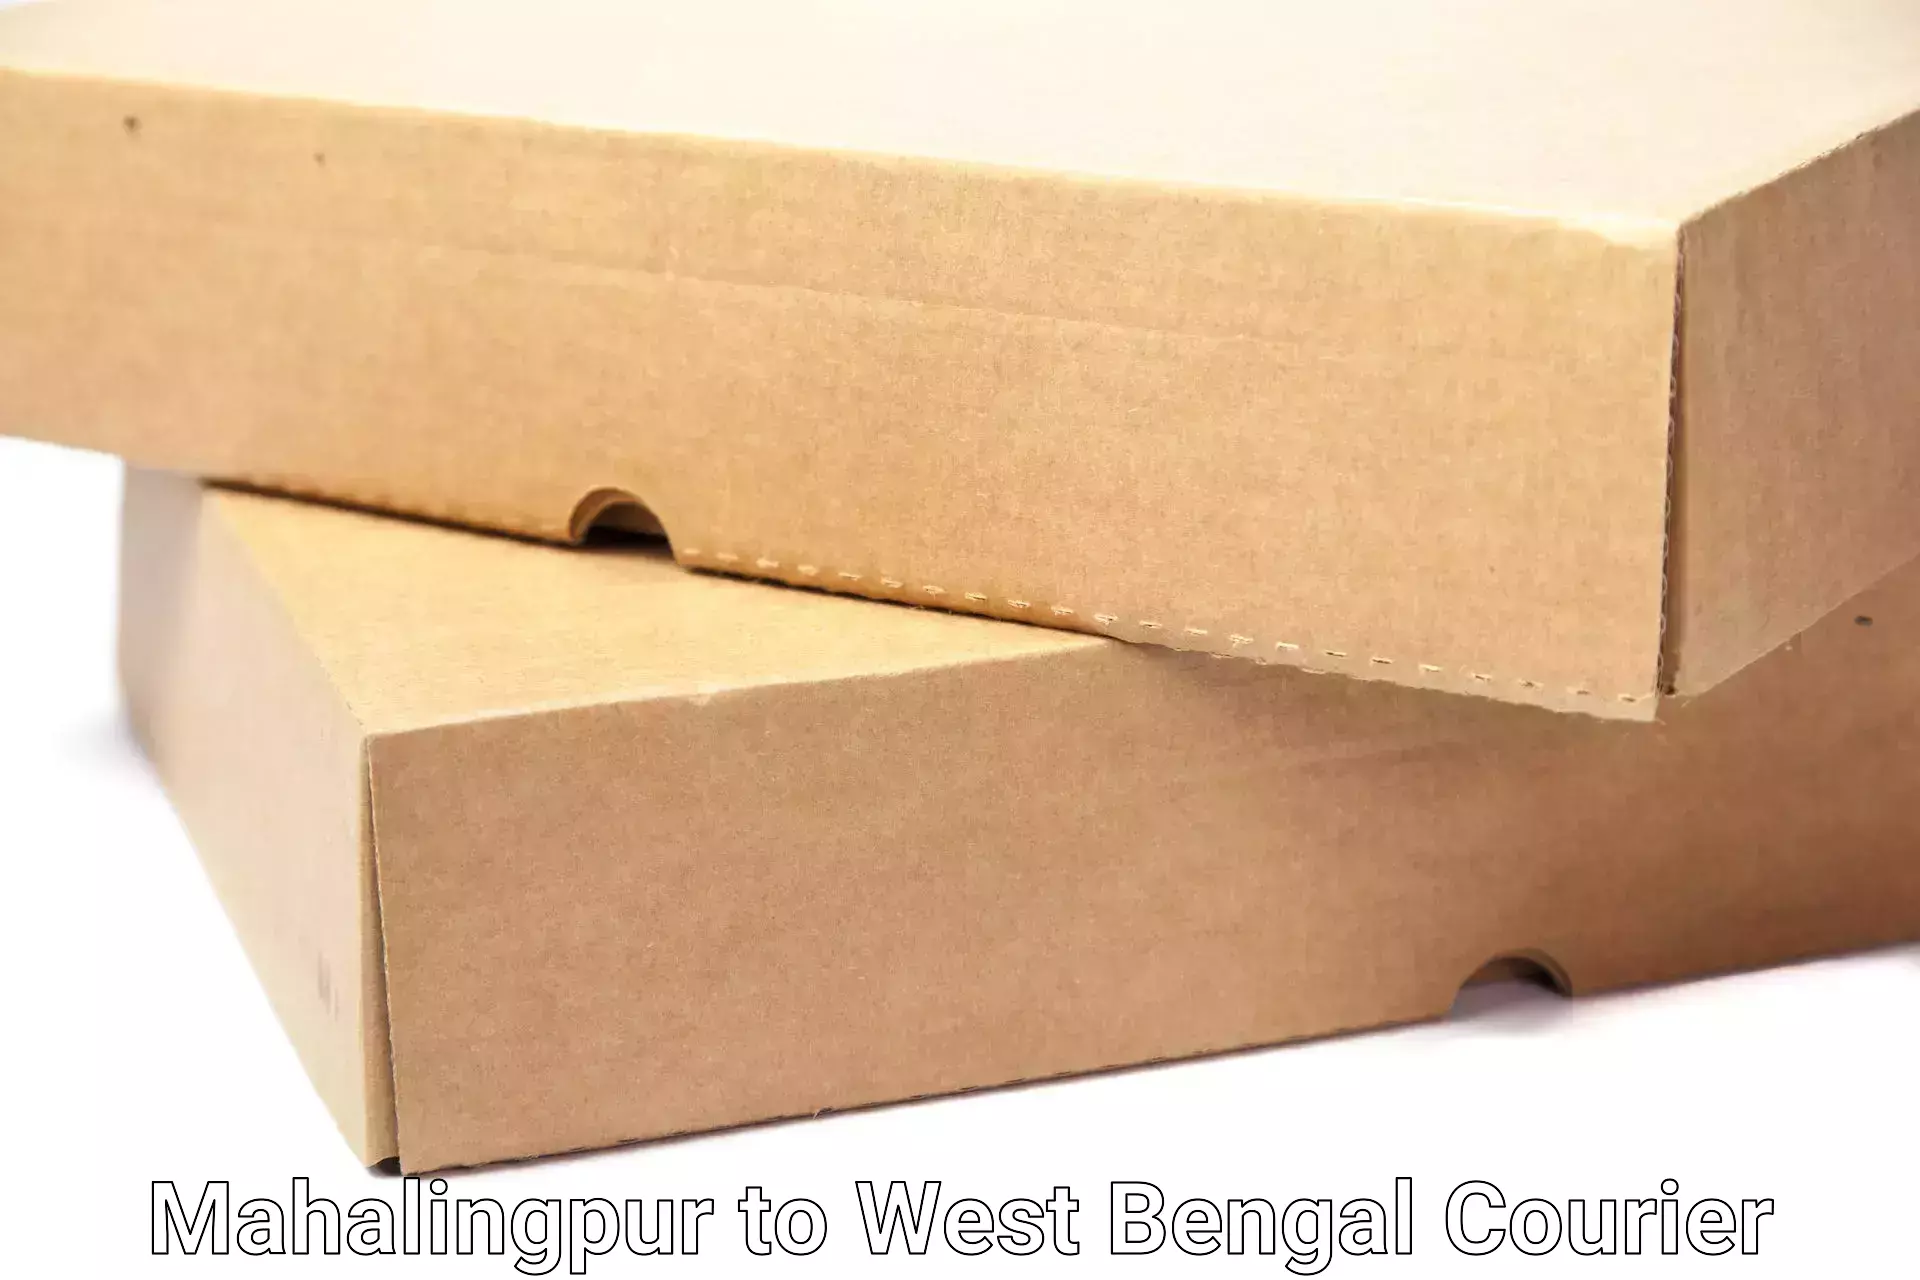 Home relocation experts Mahalingpur to Islampur